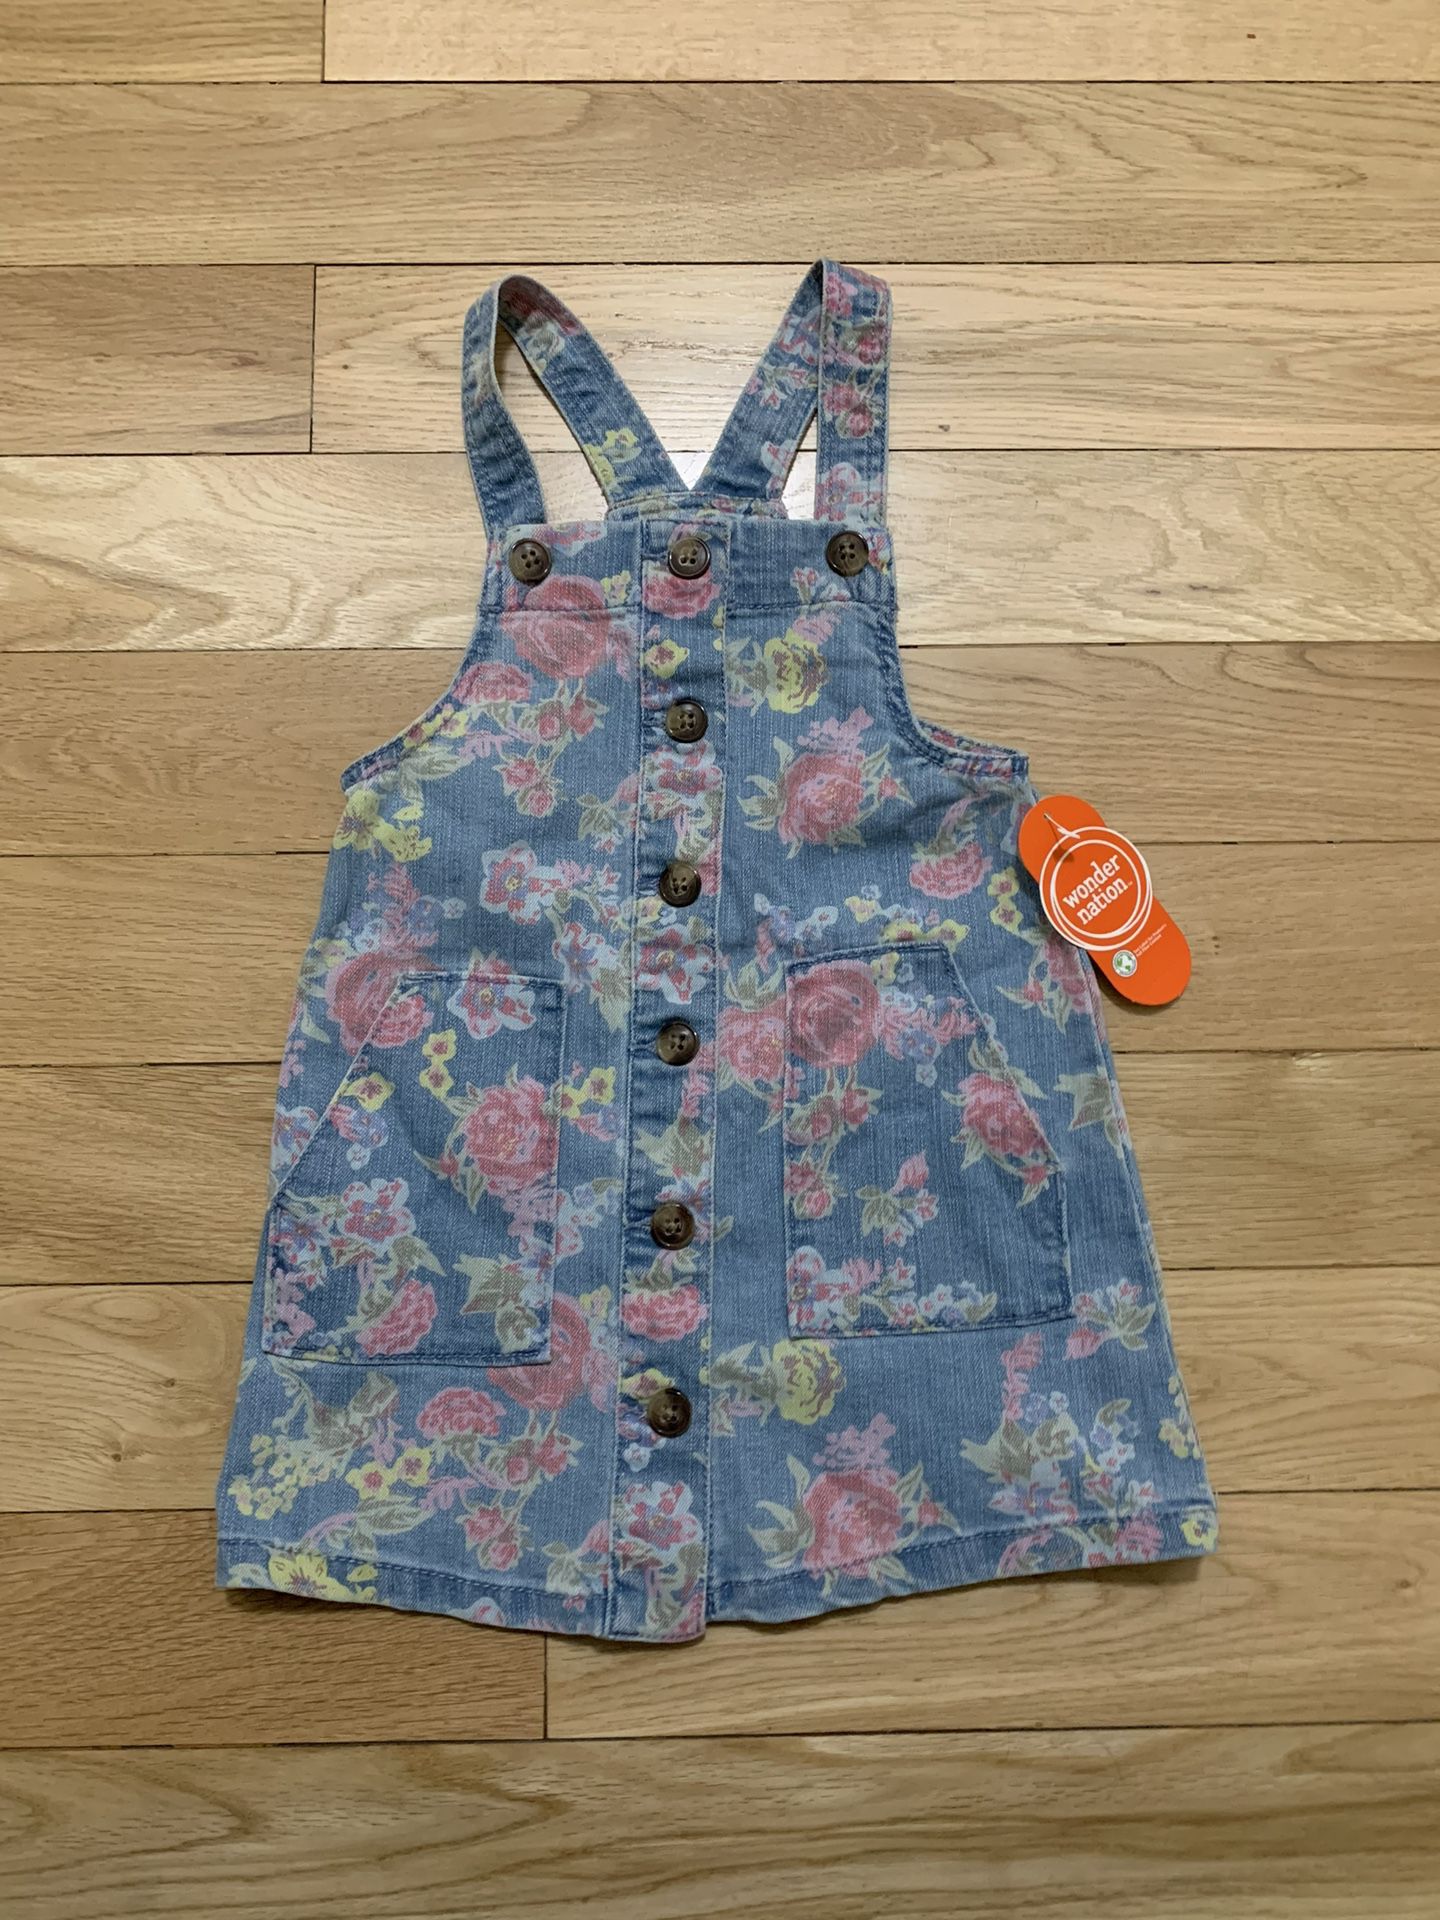 Jean Flowery Overall Dress Size 3T